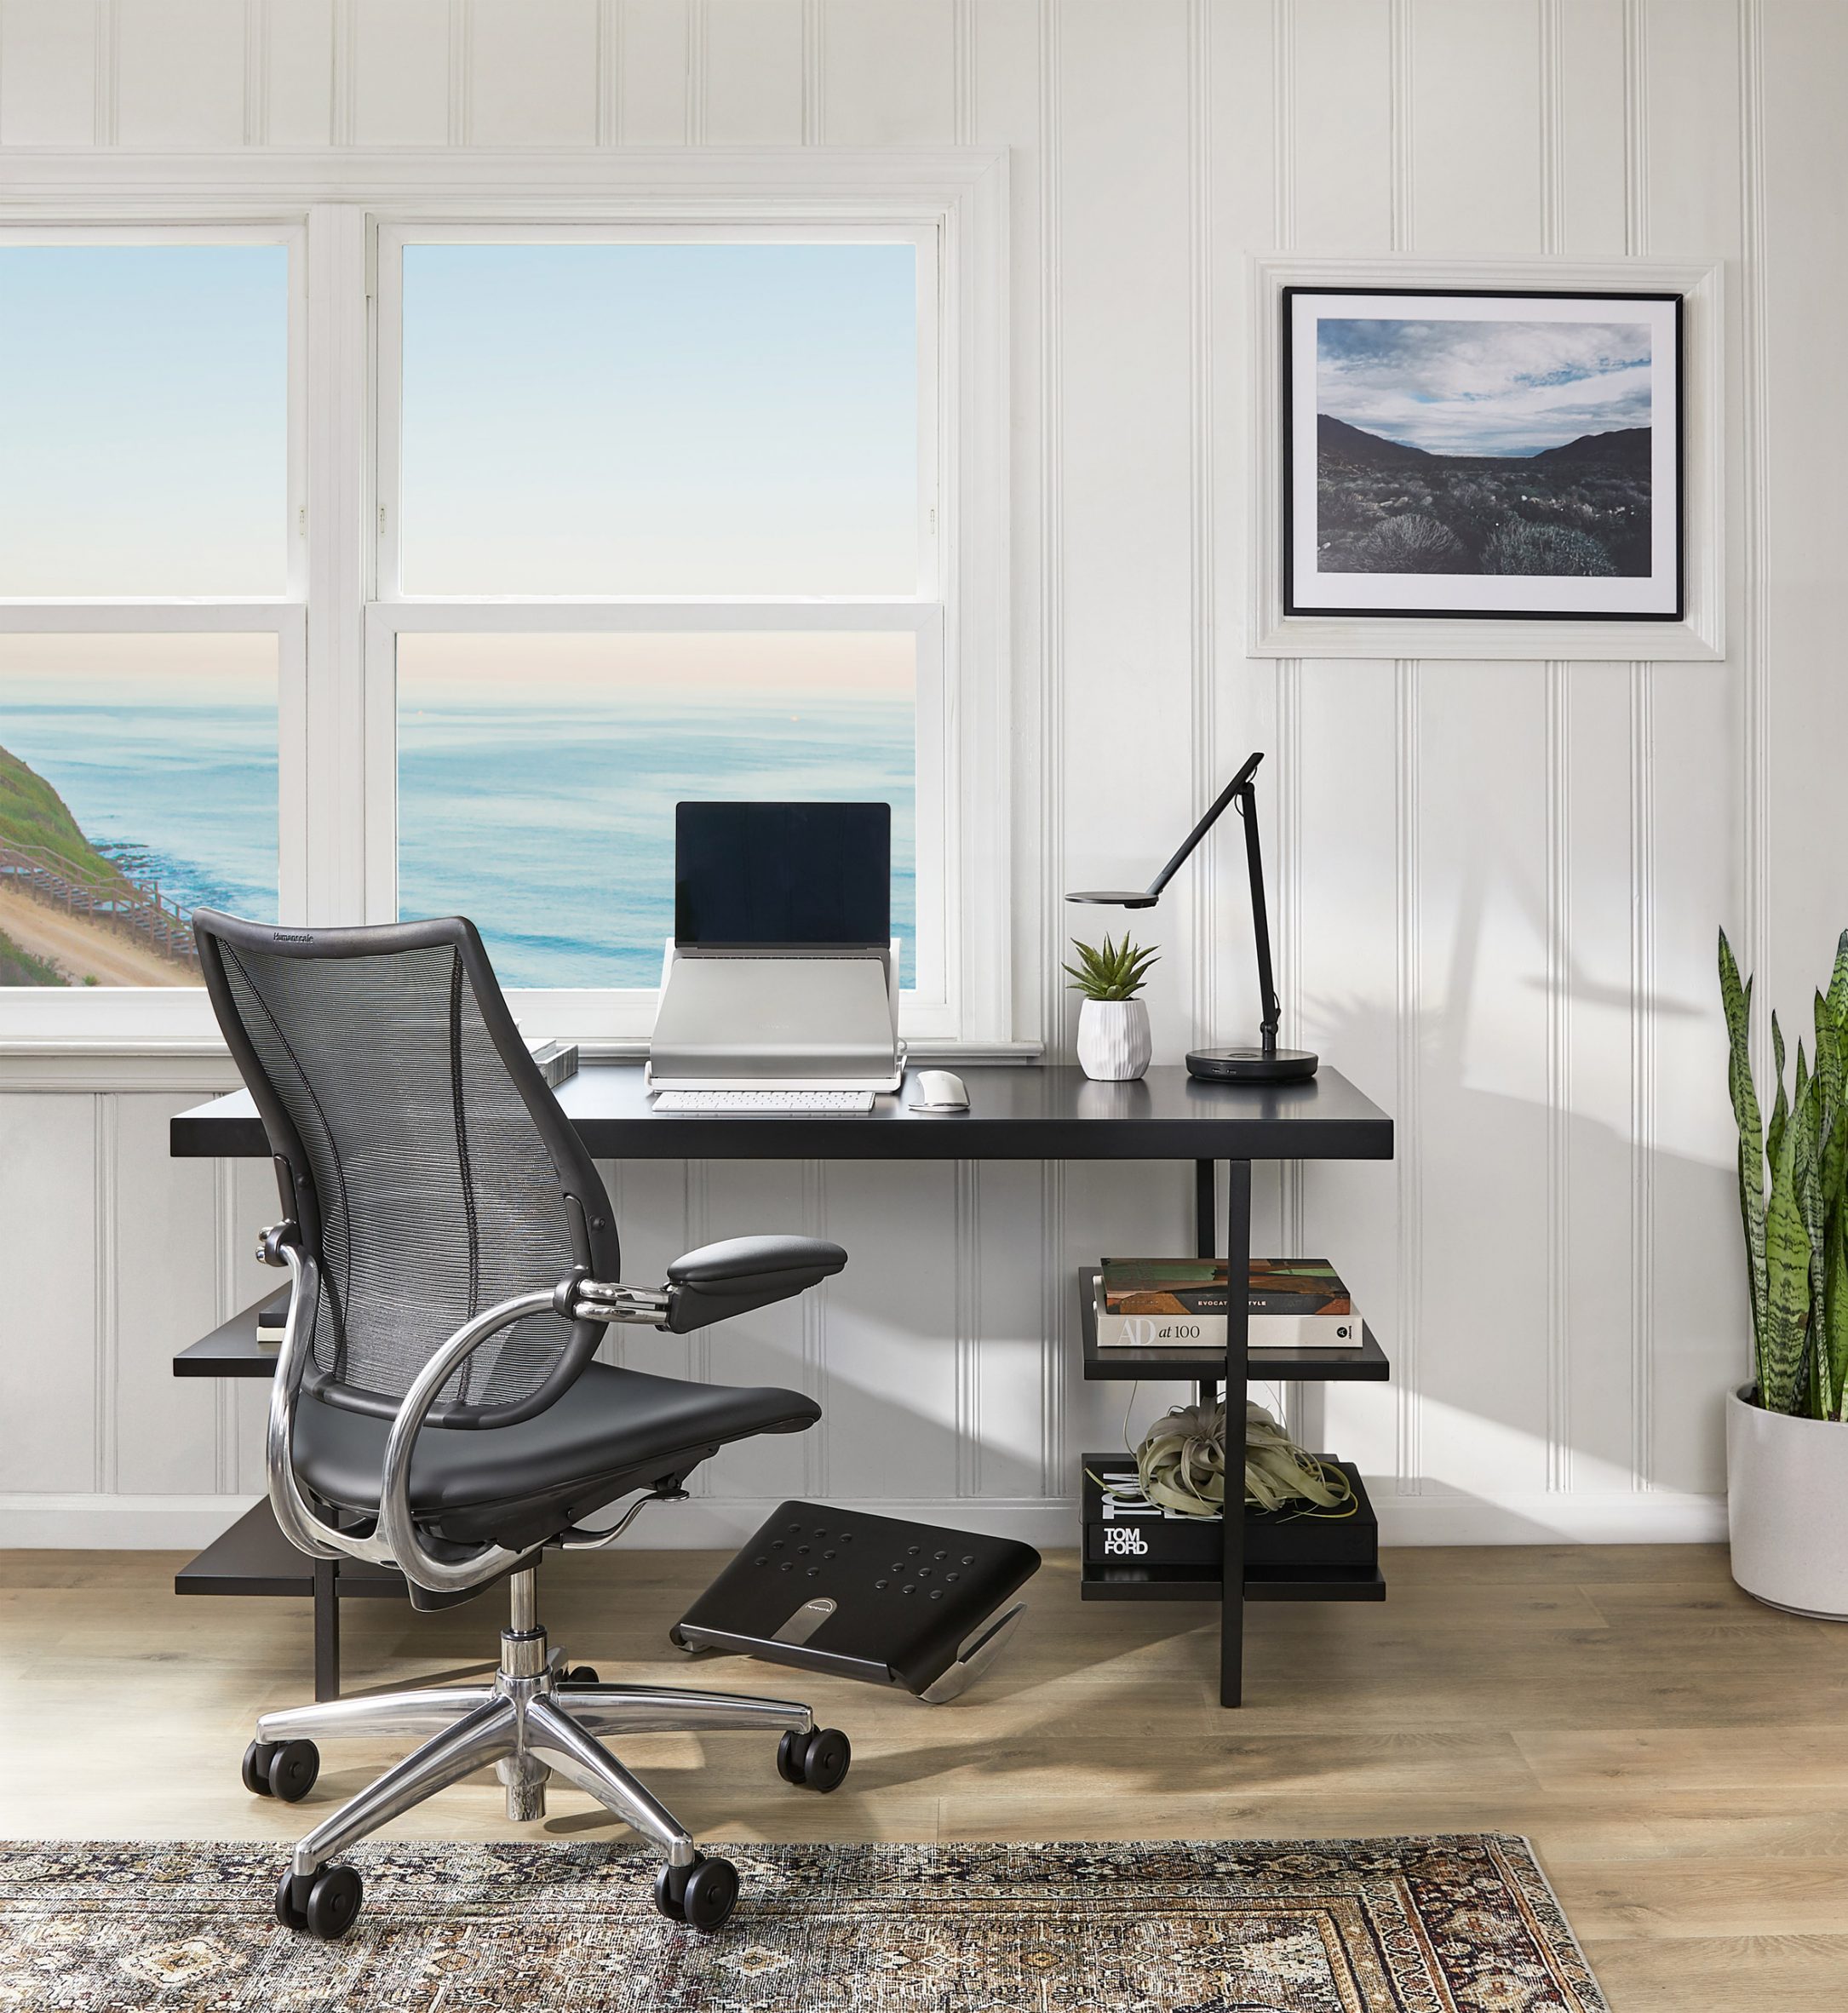 White-walled study with Liberty Ocean chair